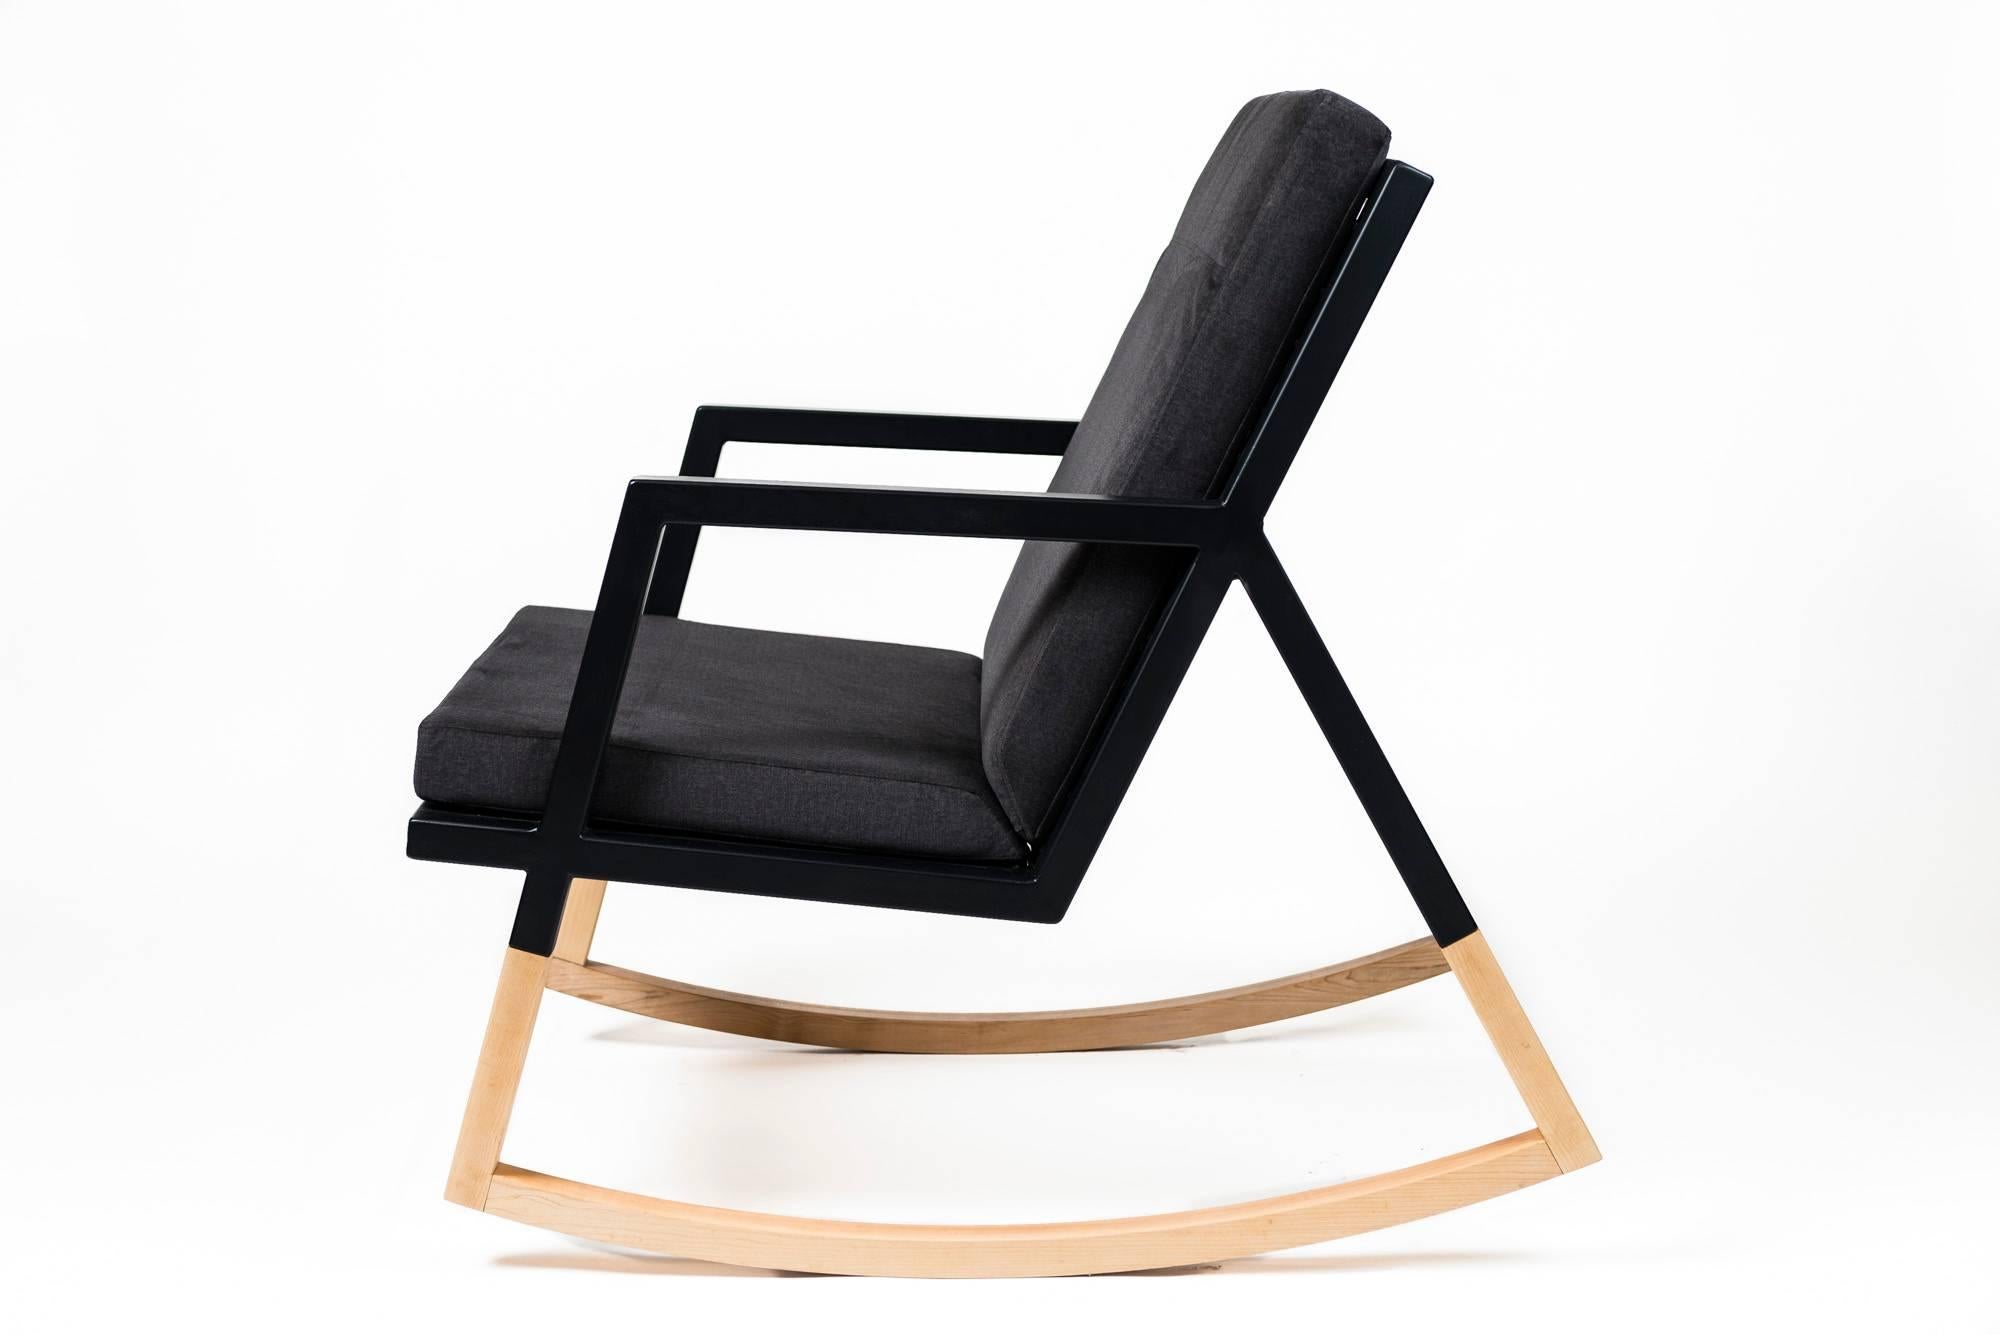 The Gabriella modern rocking chair is handmade to order from our unique Ambrozia black textured steel tubing frame design with a back chair in solid wood slats and seamless wooden rocker. This unique modern armchair offer superior comfort &